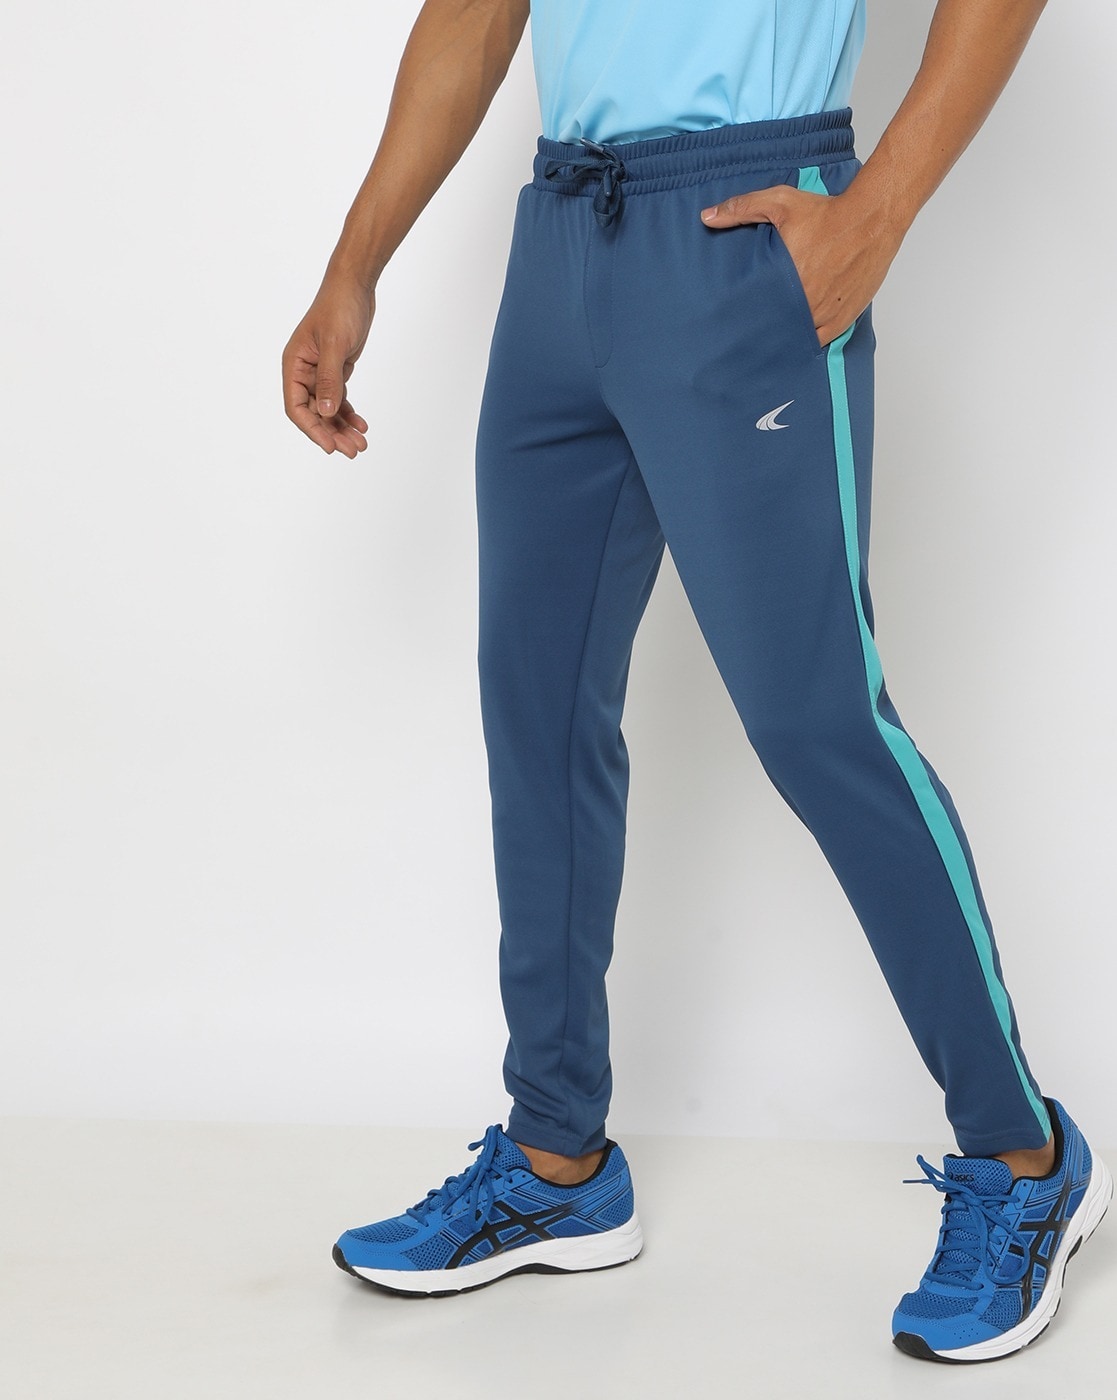 Sports track pants for mens | Apparelsnyou by Apparelsnyou - Issuu